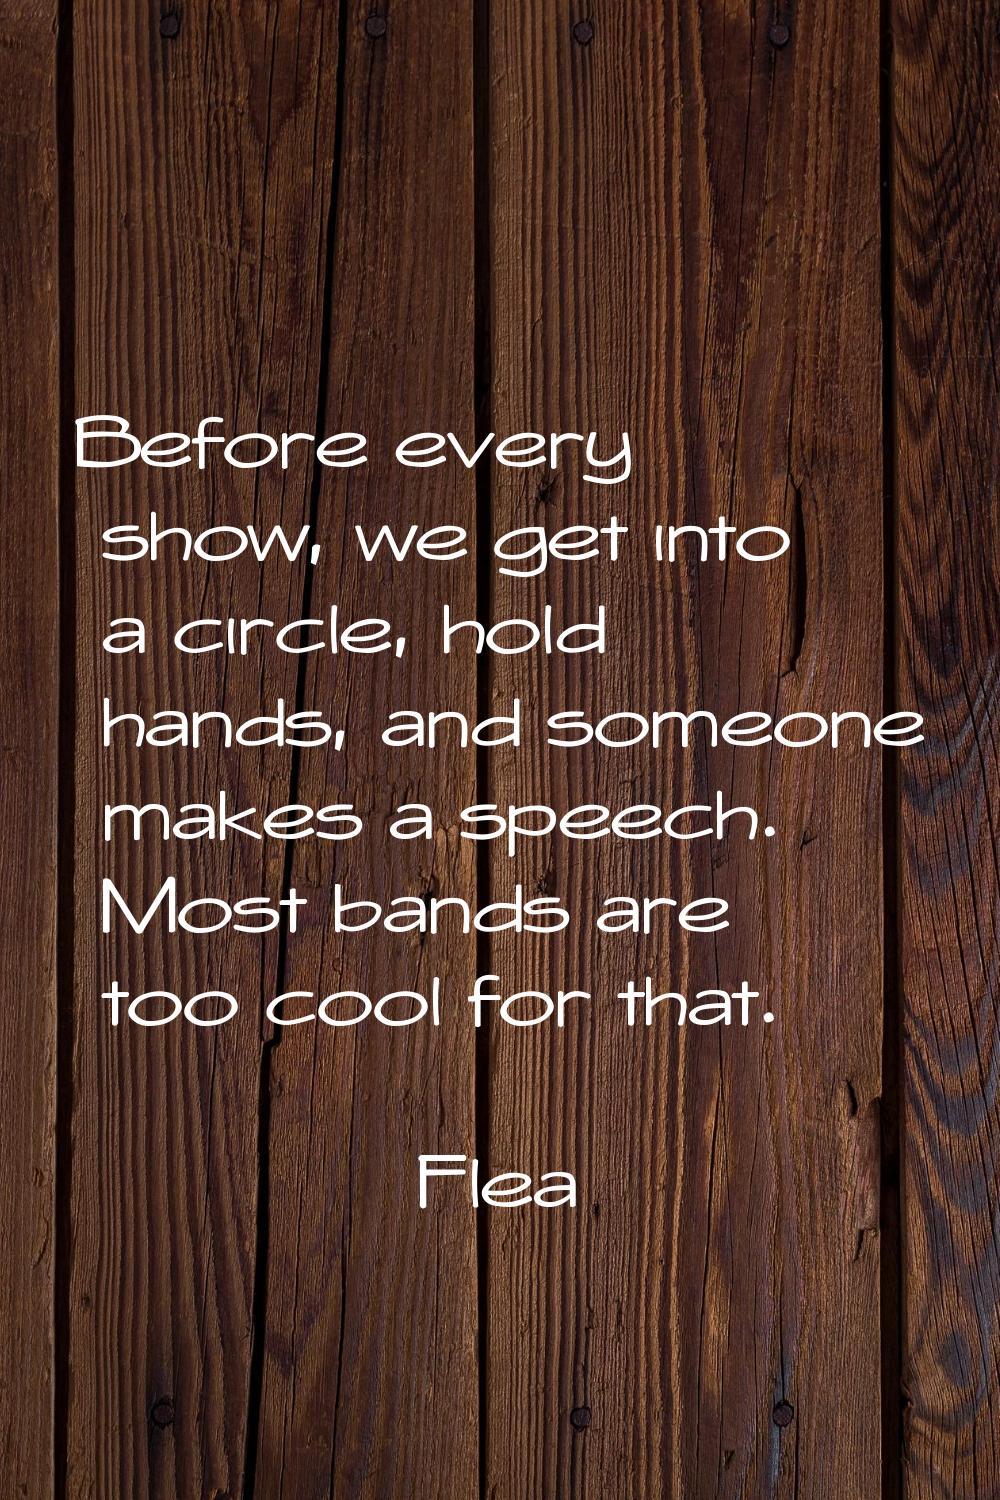 Before every show, we get into a circle, hold hands, and someone makes a speech. Most bands are too